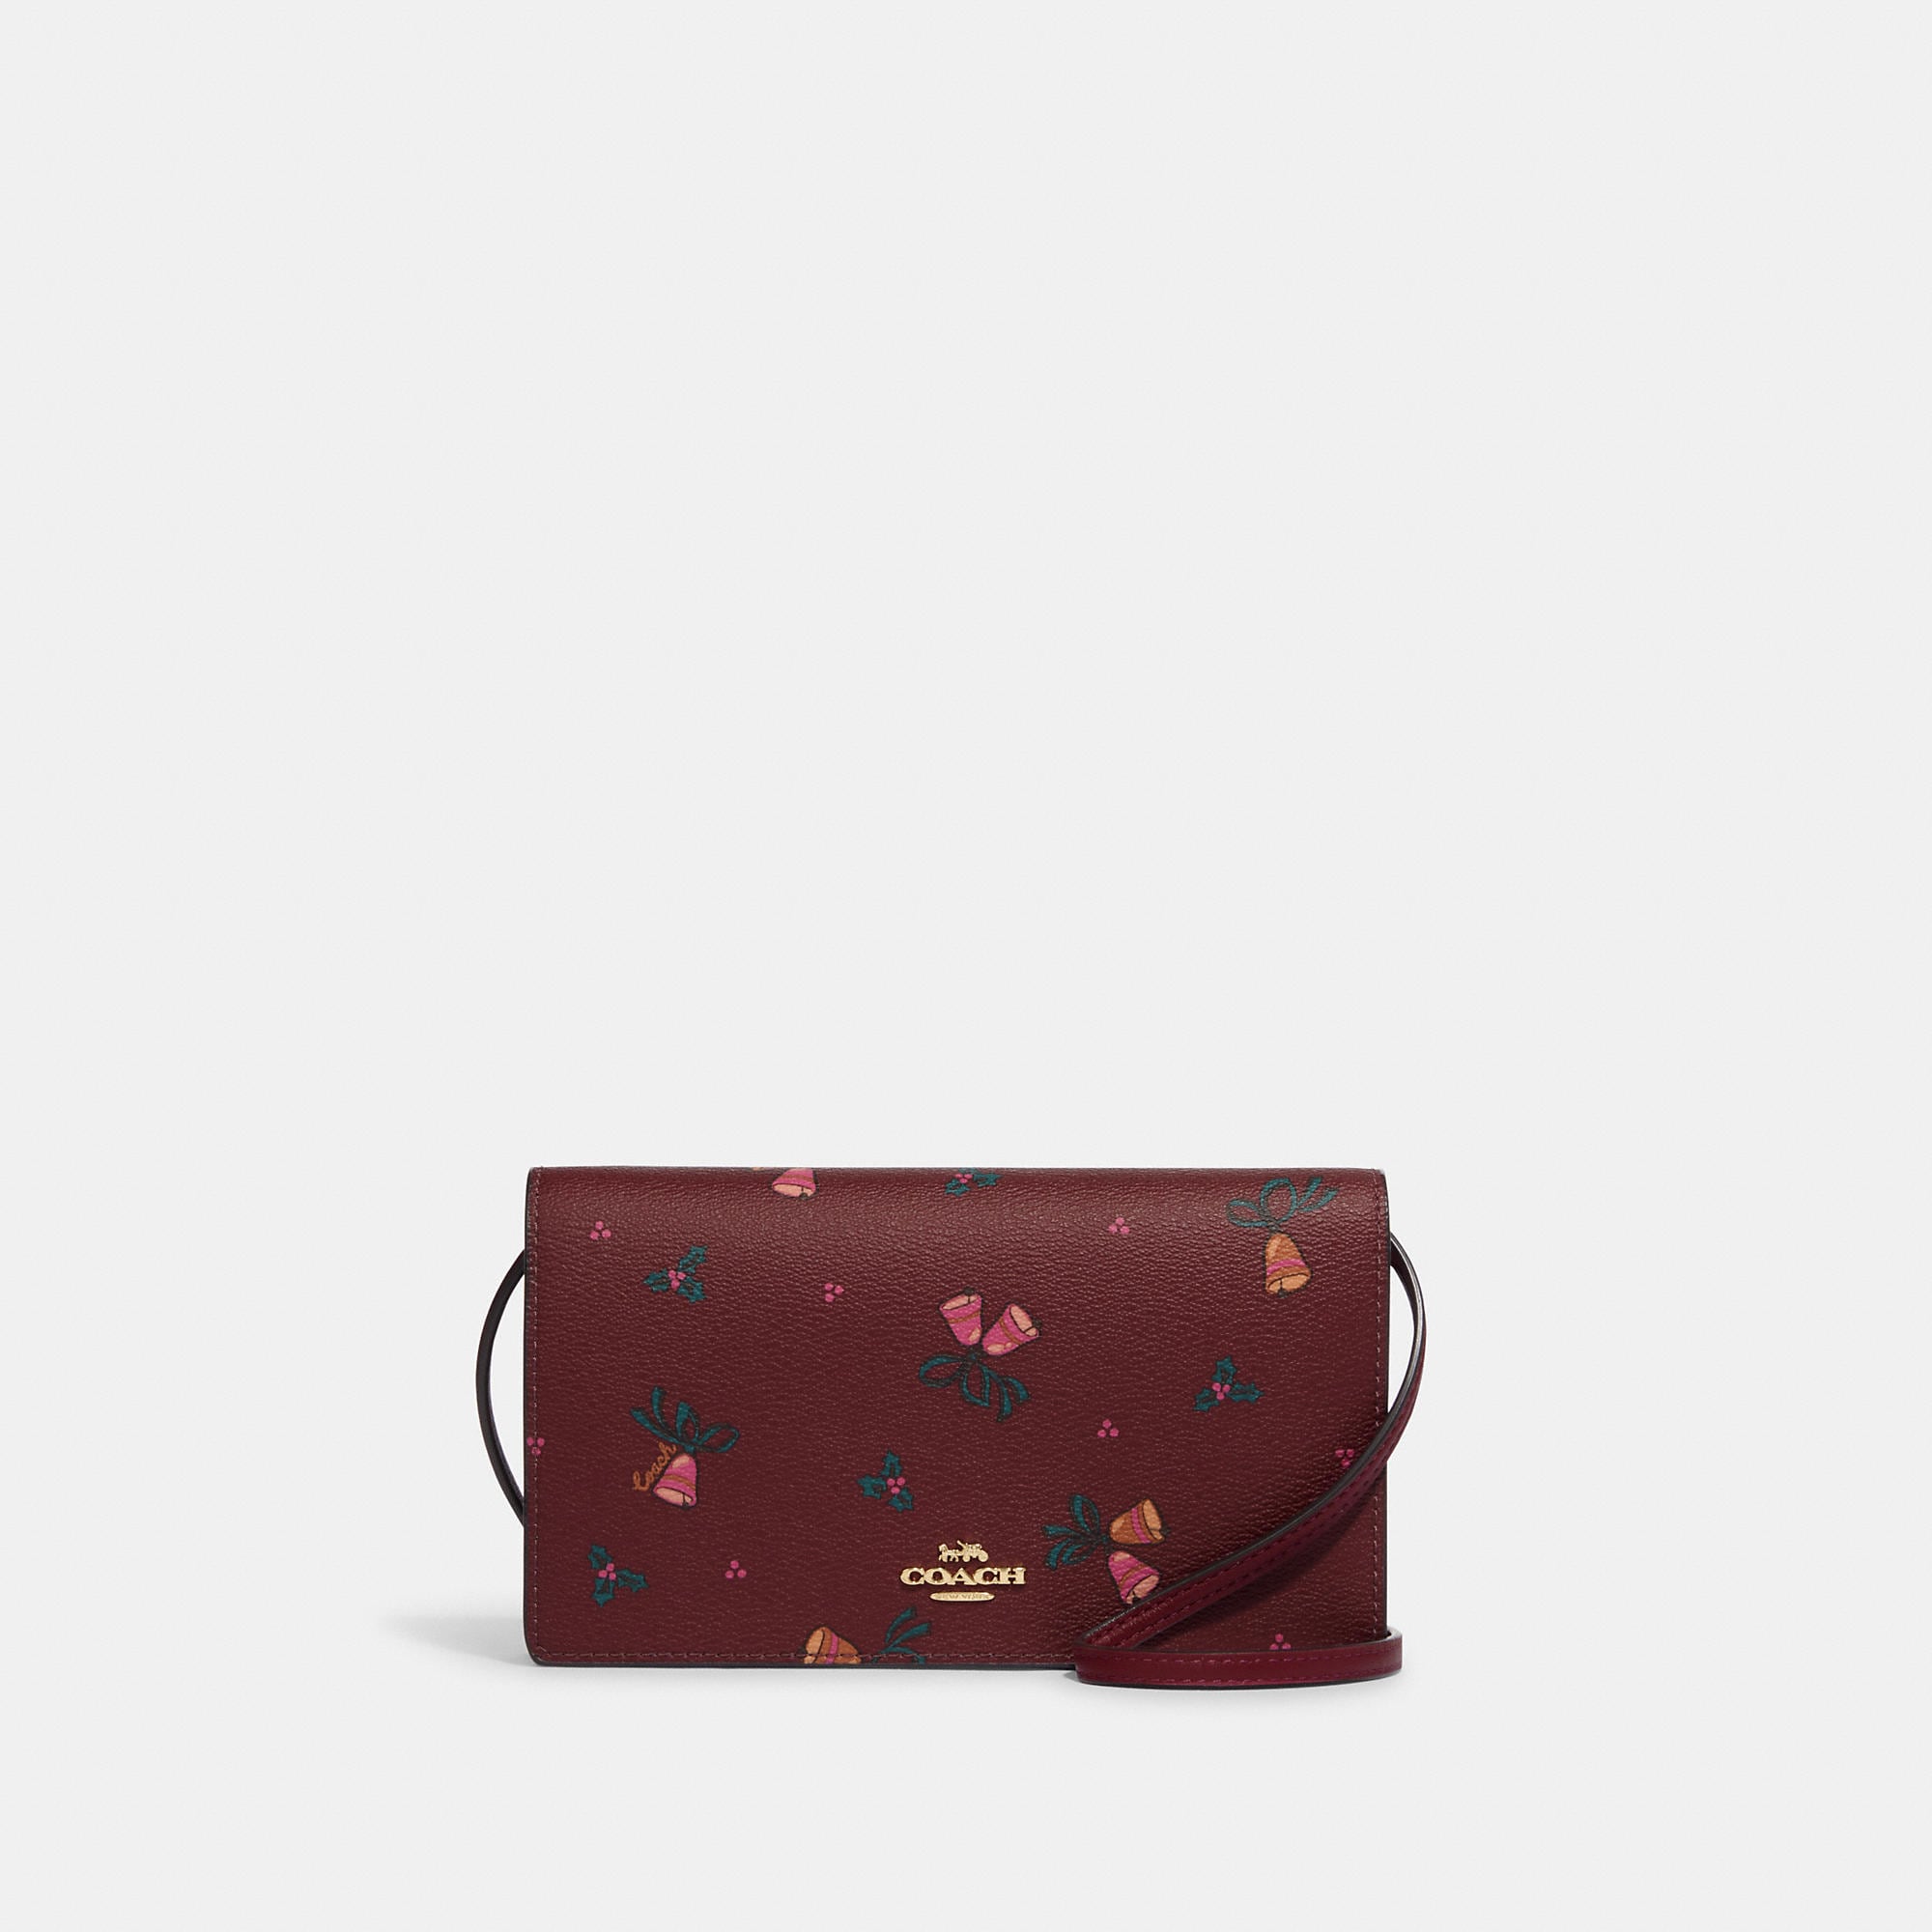 COACH OUTLET Coach Outlet Anna Foldover Clutch Crossbody With Holiday Bells Print